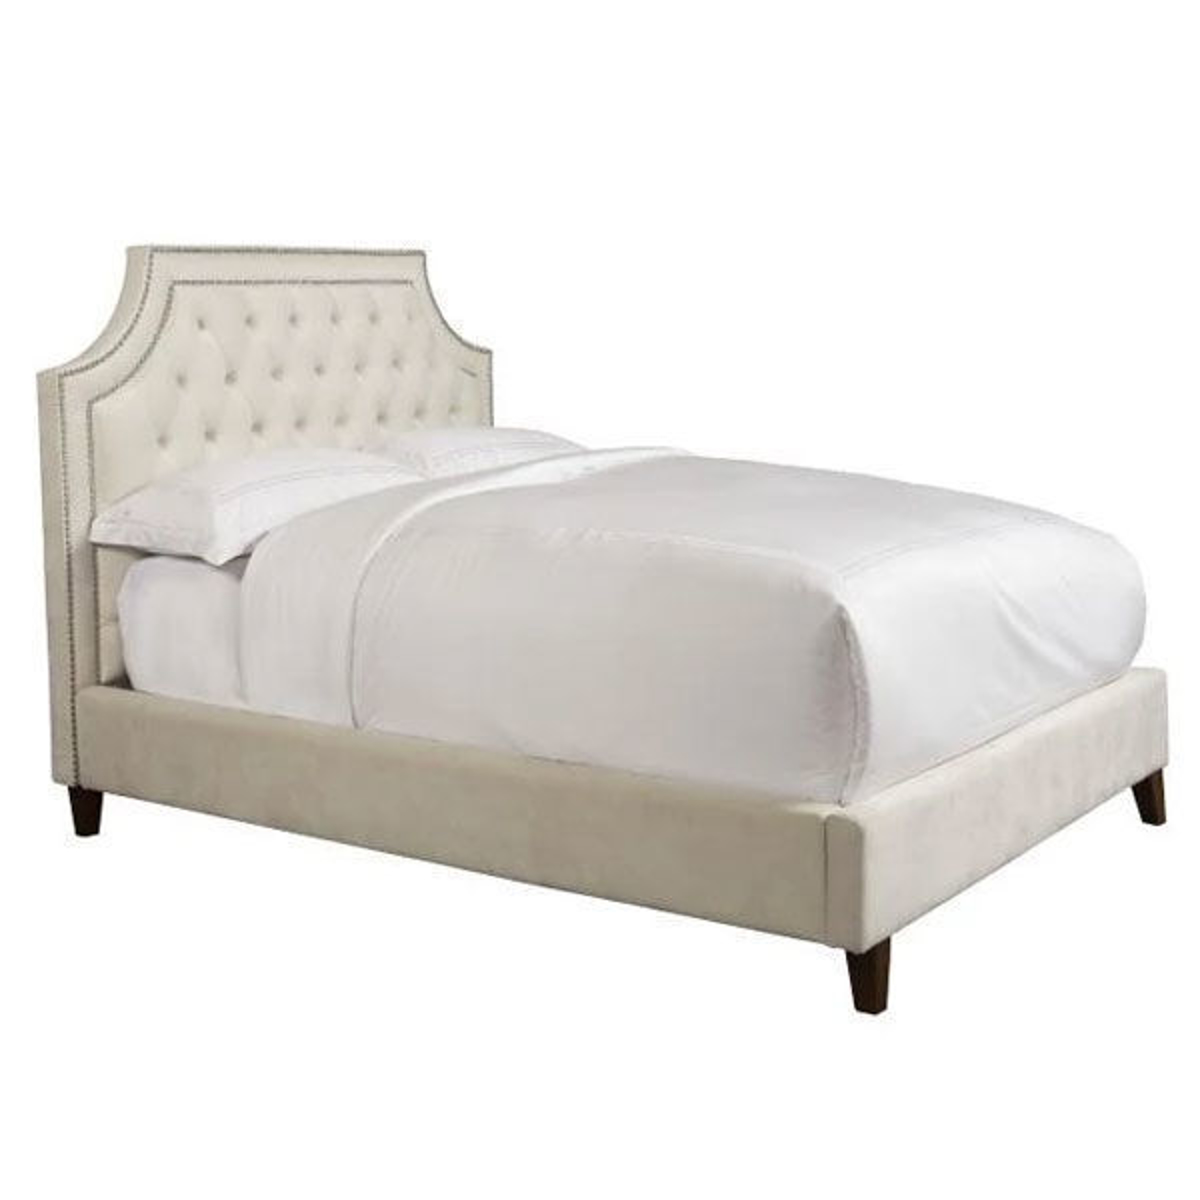 Picture of JASMINE UPHOLSTERED CHAMPAGNE KING BED